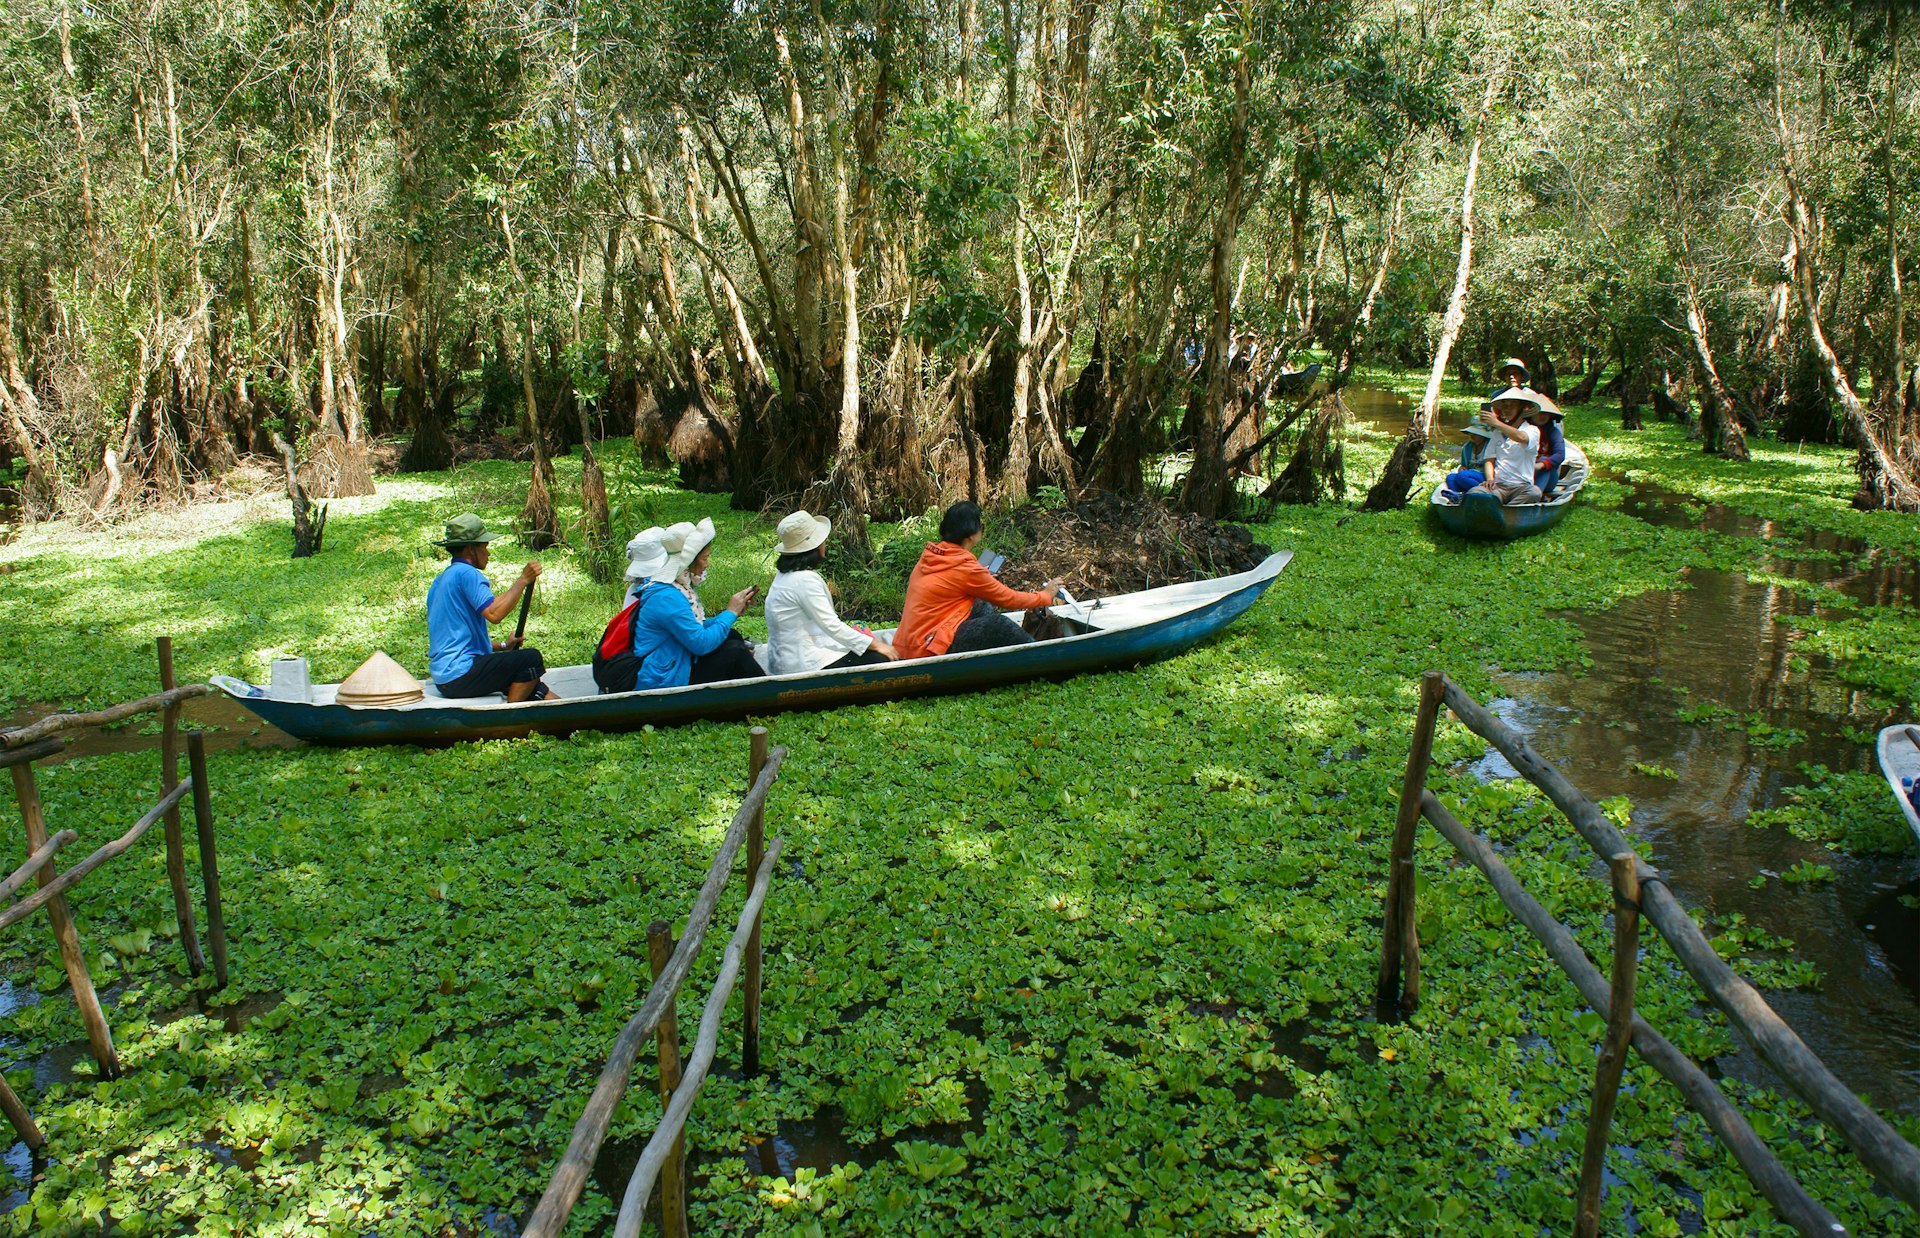 Group of travellers at Chau Doc, Mekong Delta, Tra Su indigo forest, crowded row boat, ecotourism, Vietnam,